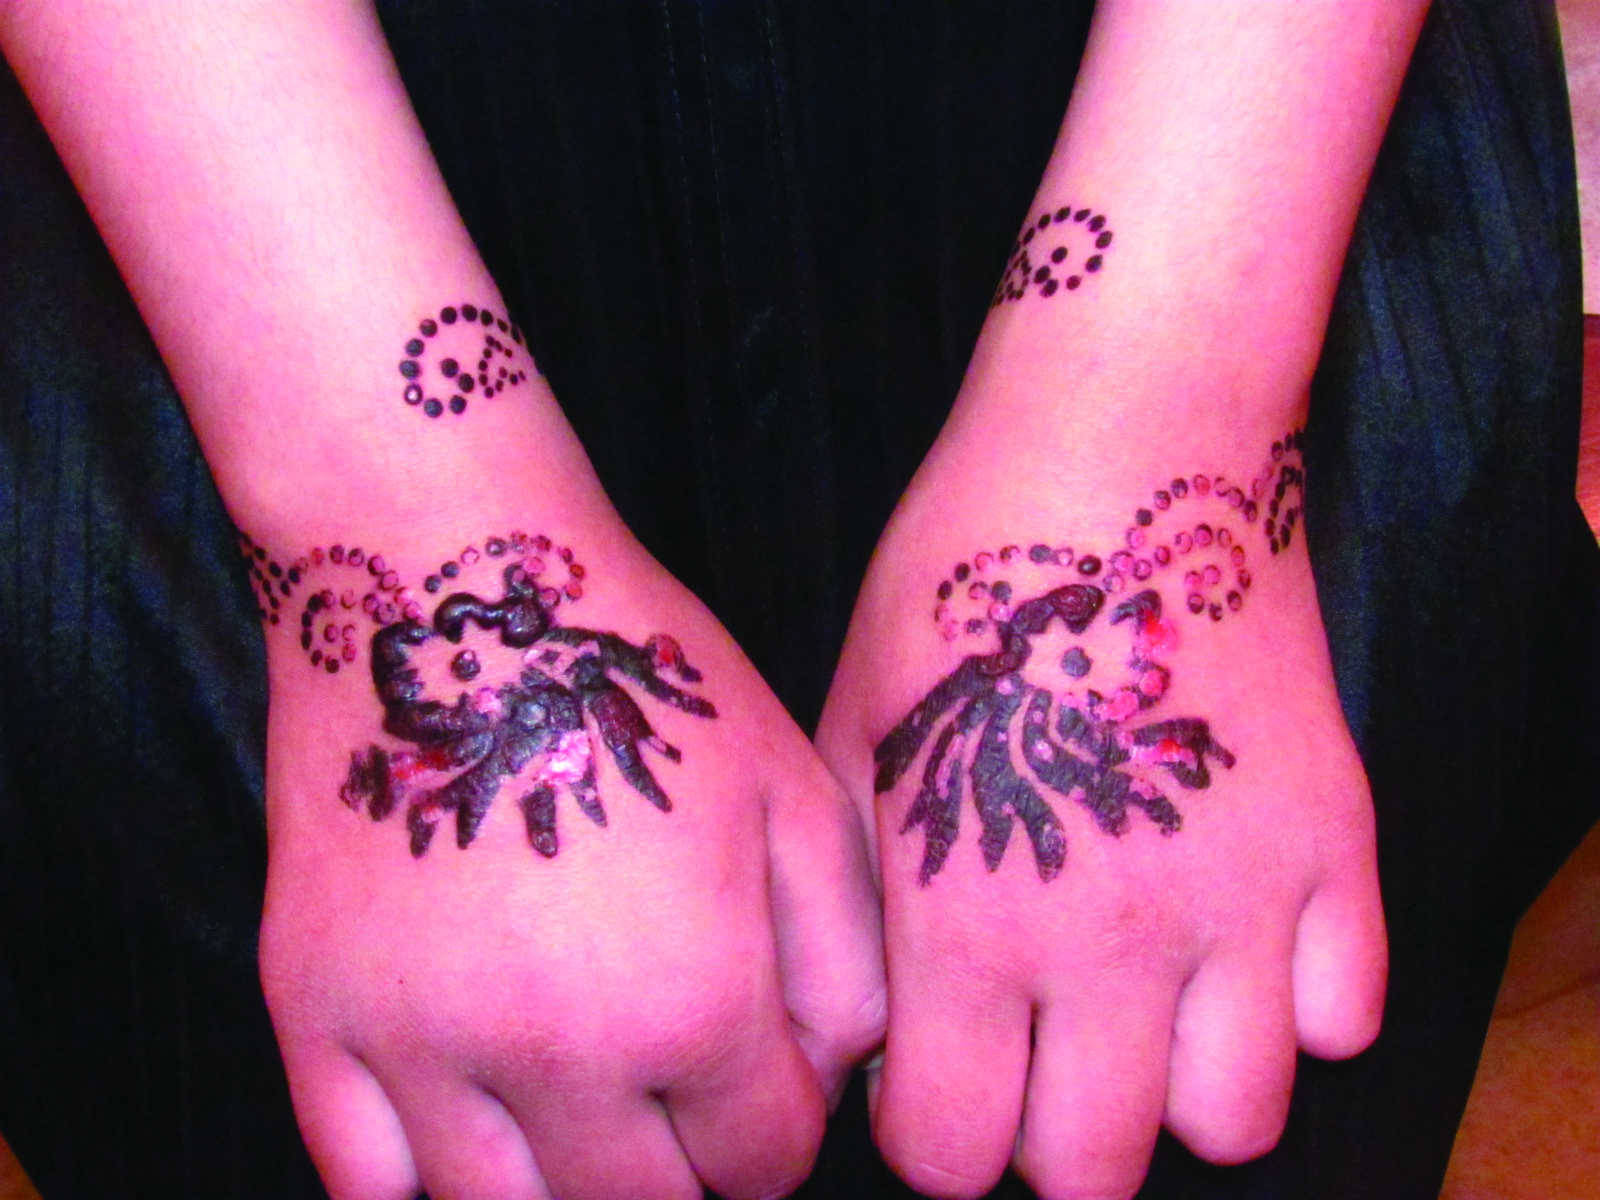 Red henna tattoo on the palmar surfaces of the hands.